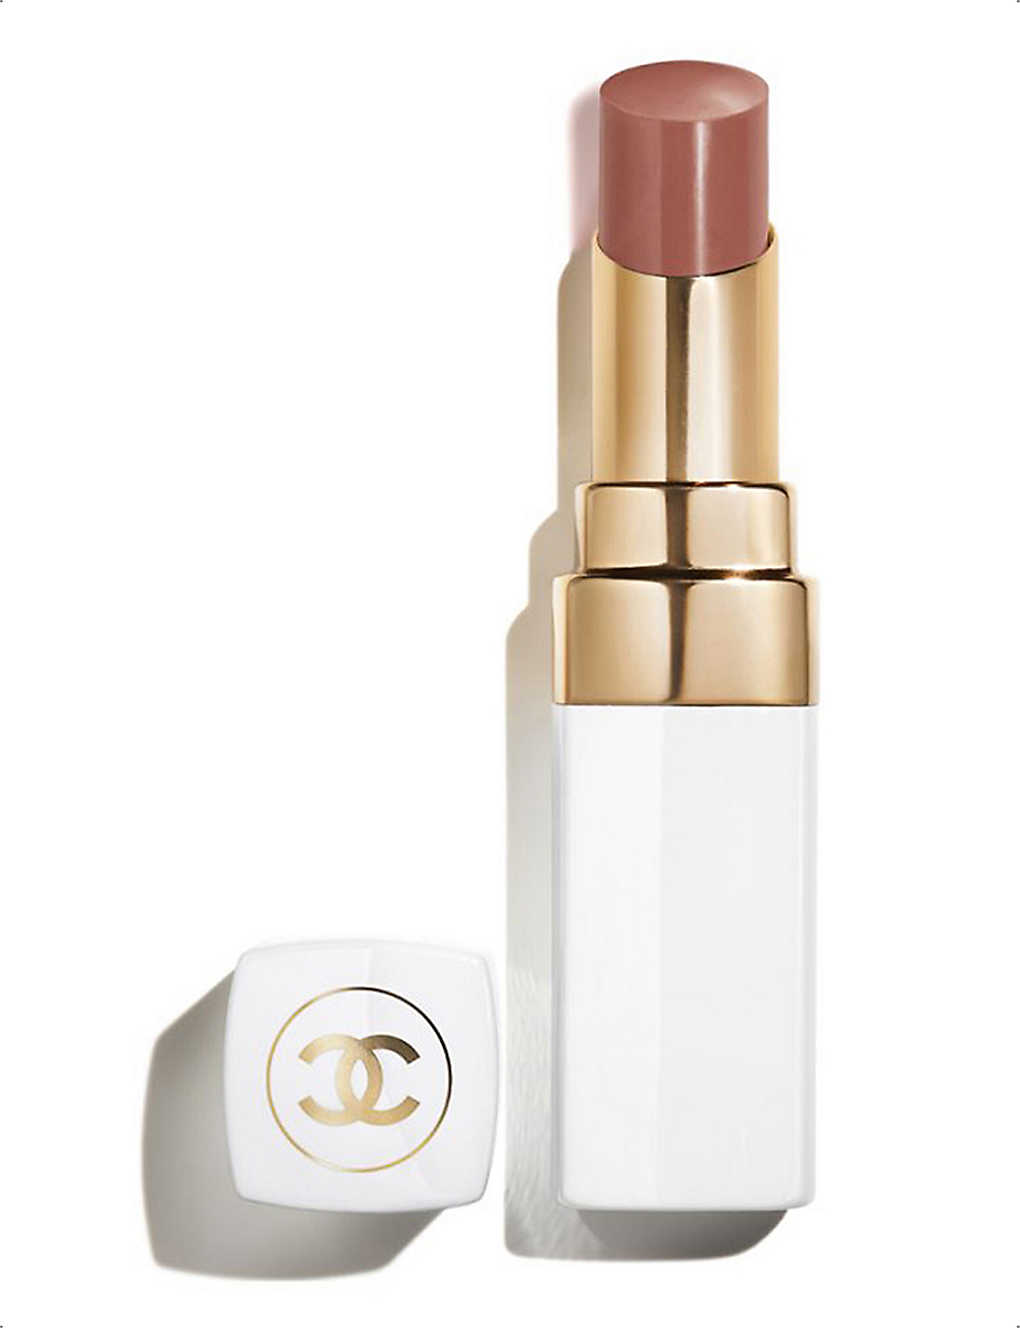 Chanel Dreamy White 912 Rouge Coco Baume Hydrating Tinted Lip Balm 3g